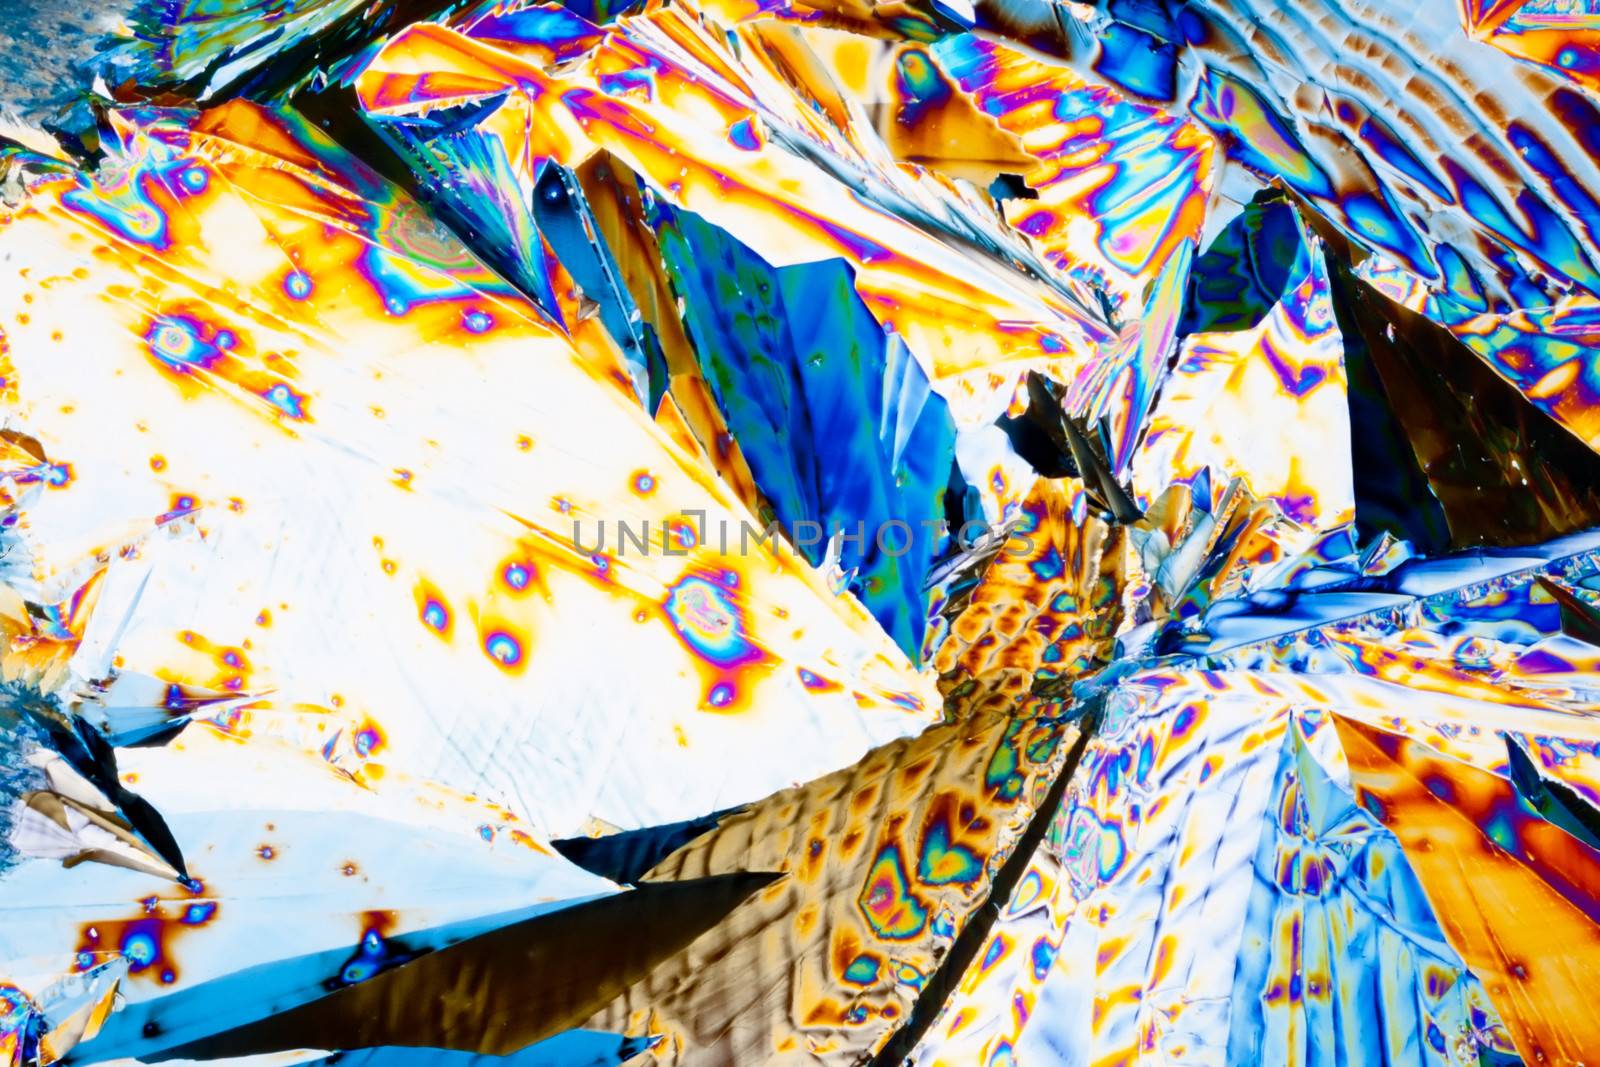 Colorful appearance of crystals of tartaric acid, one of many compounds found in grapes and wine, in polarized light.